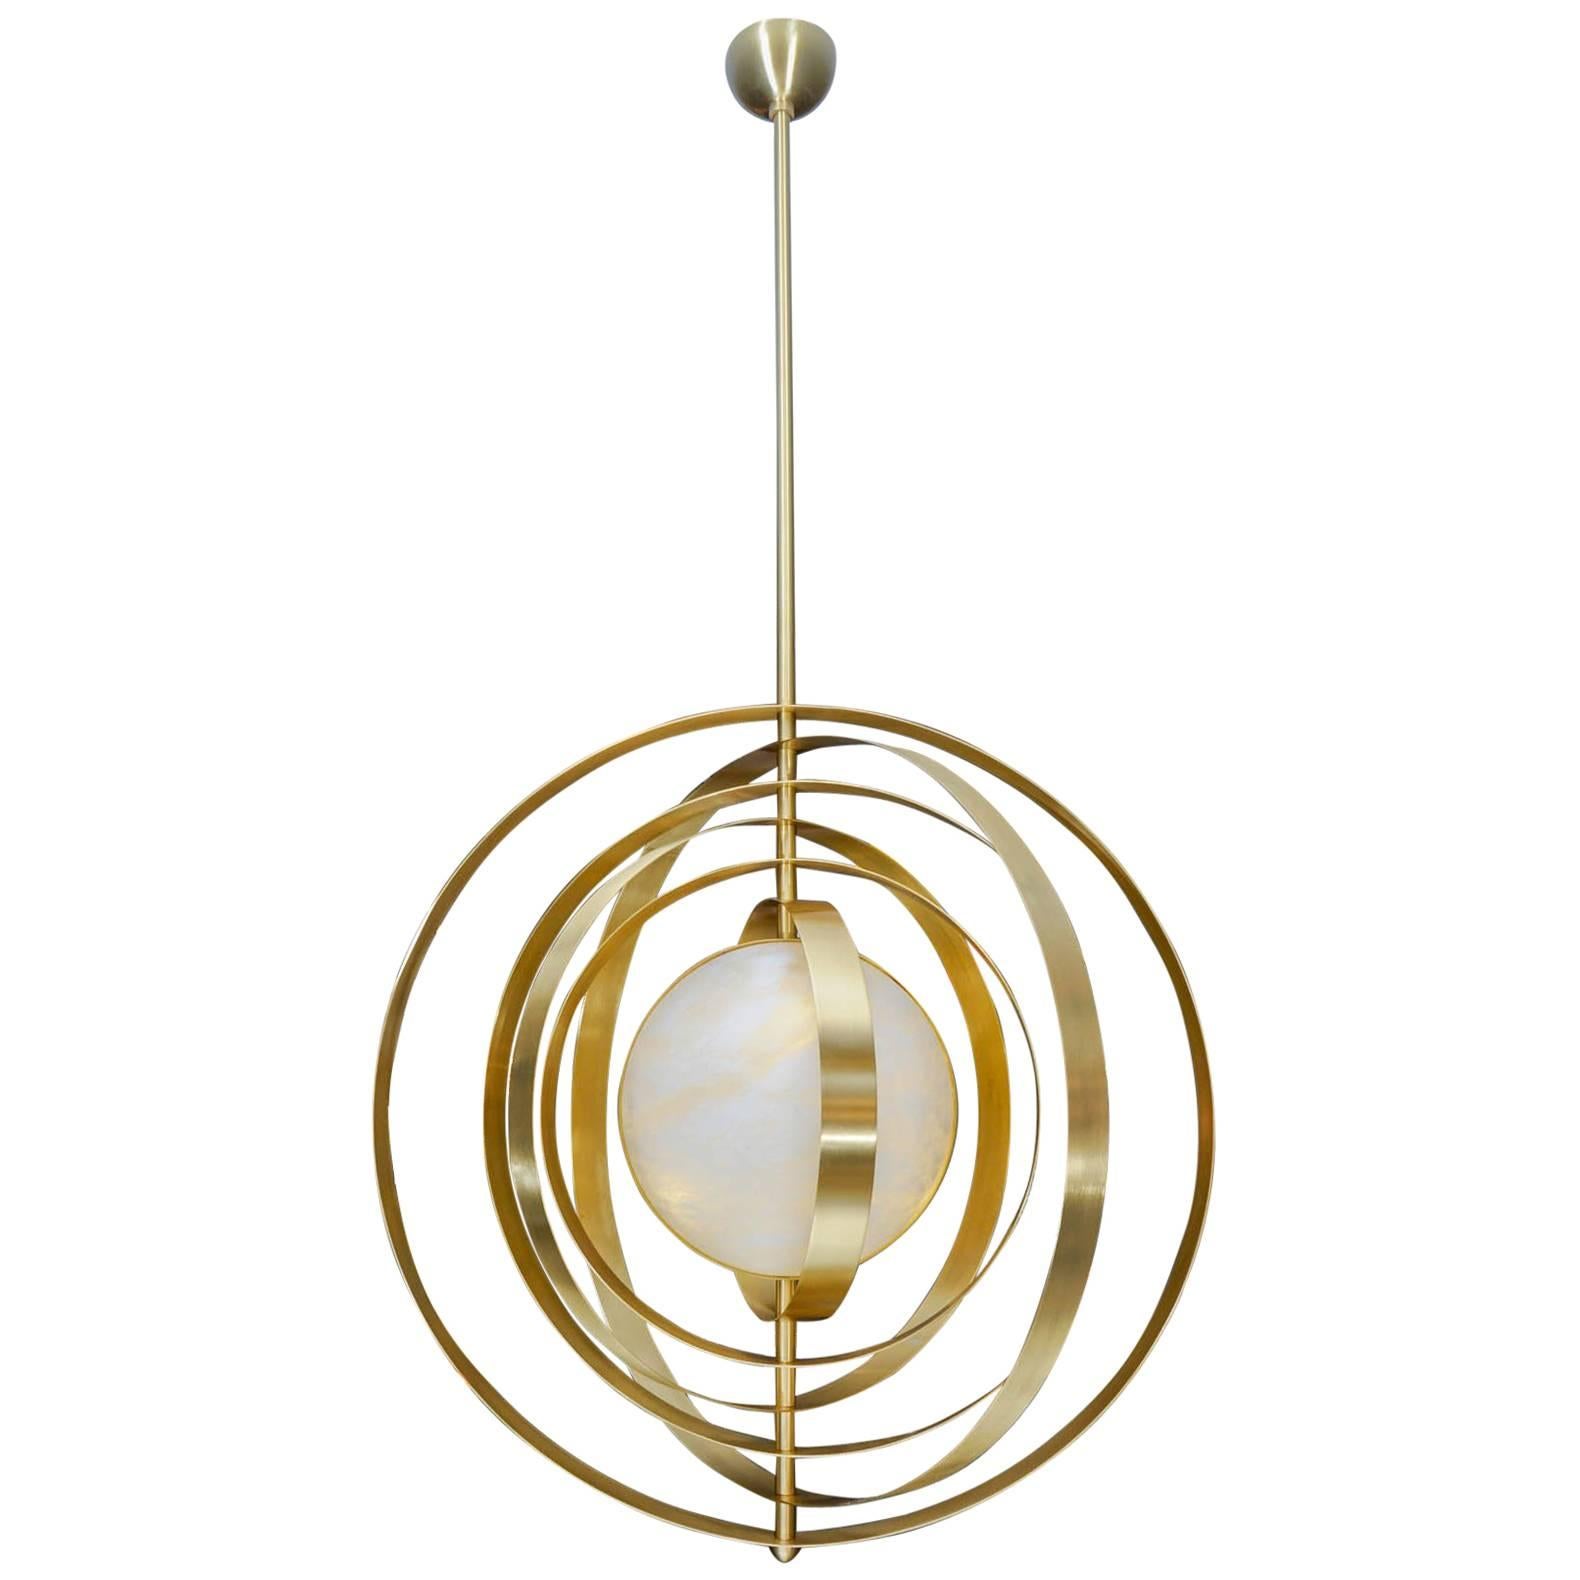 Glustin Luminaires Creation Alabaster Suspension with Brass Rings For Sale